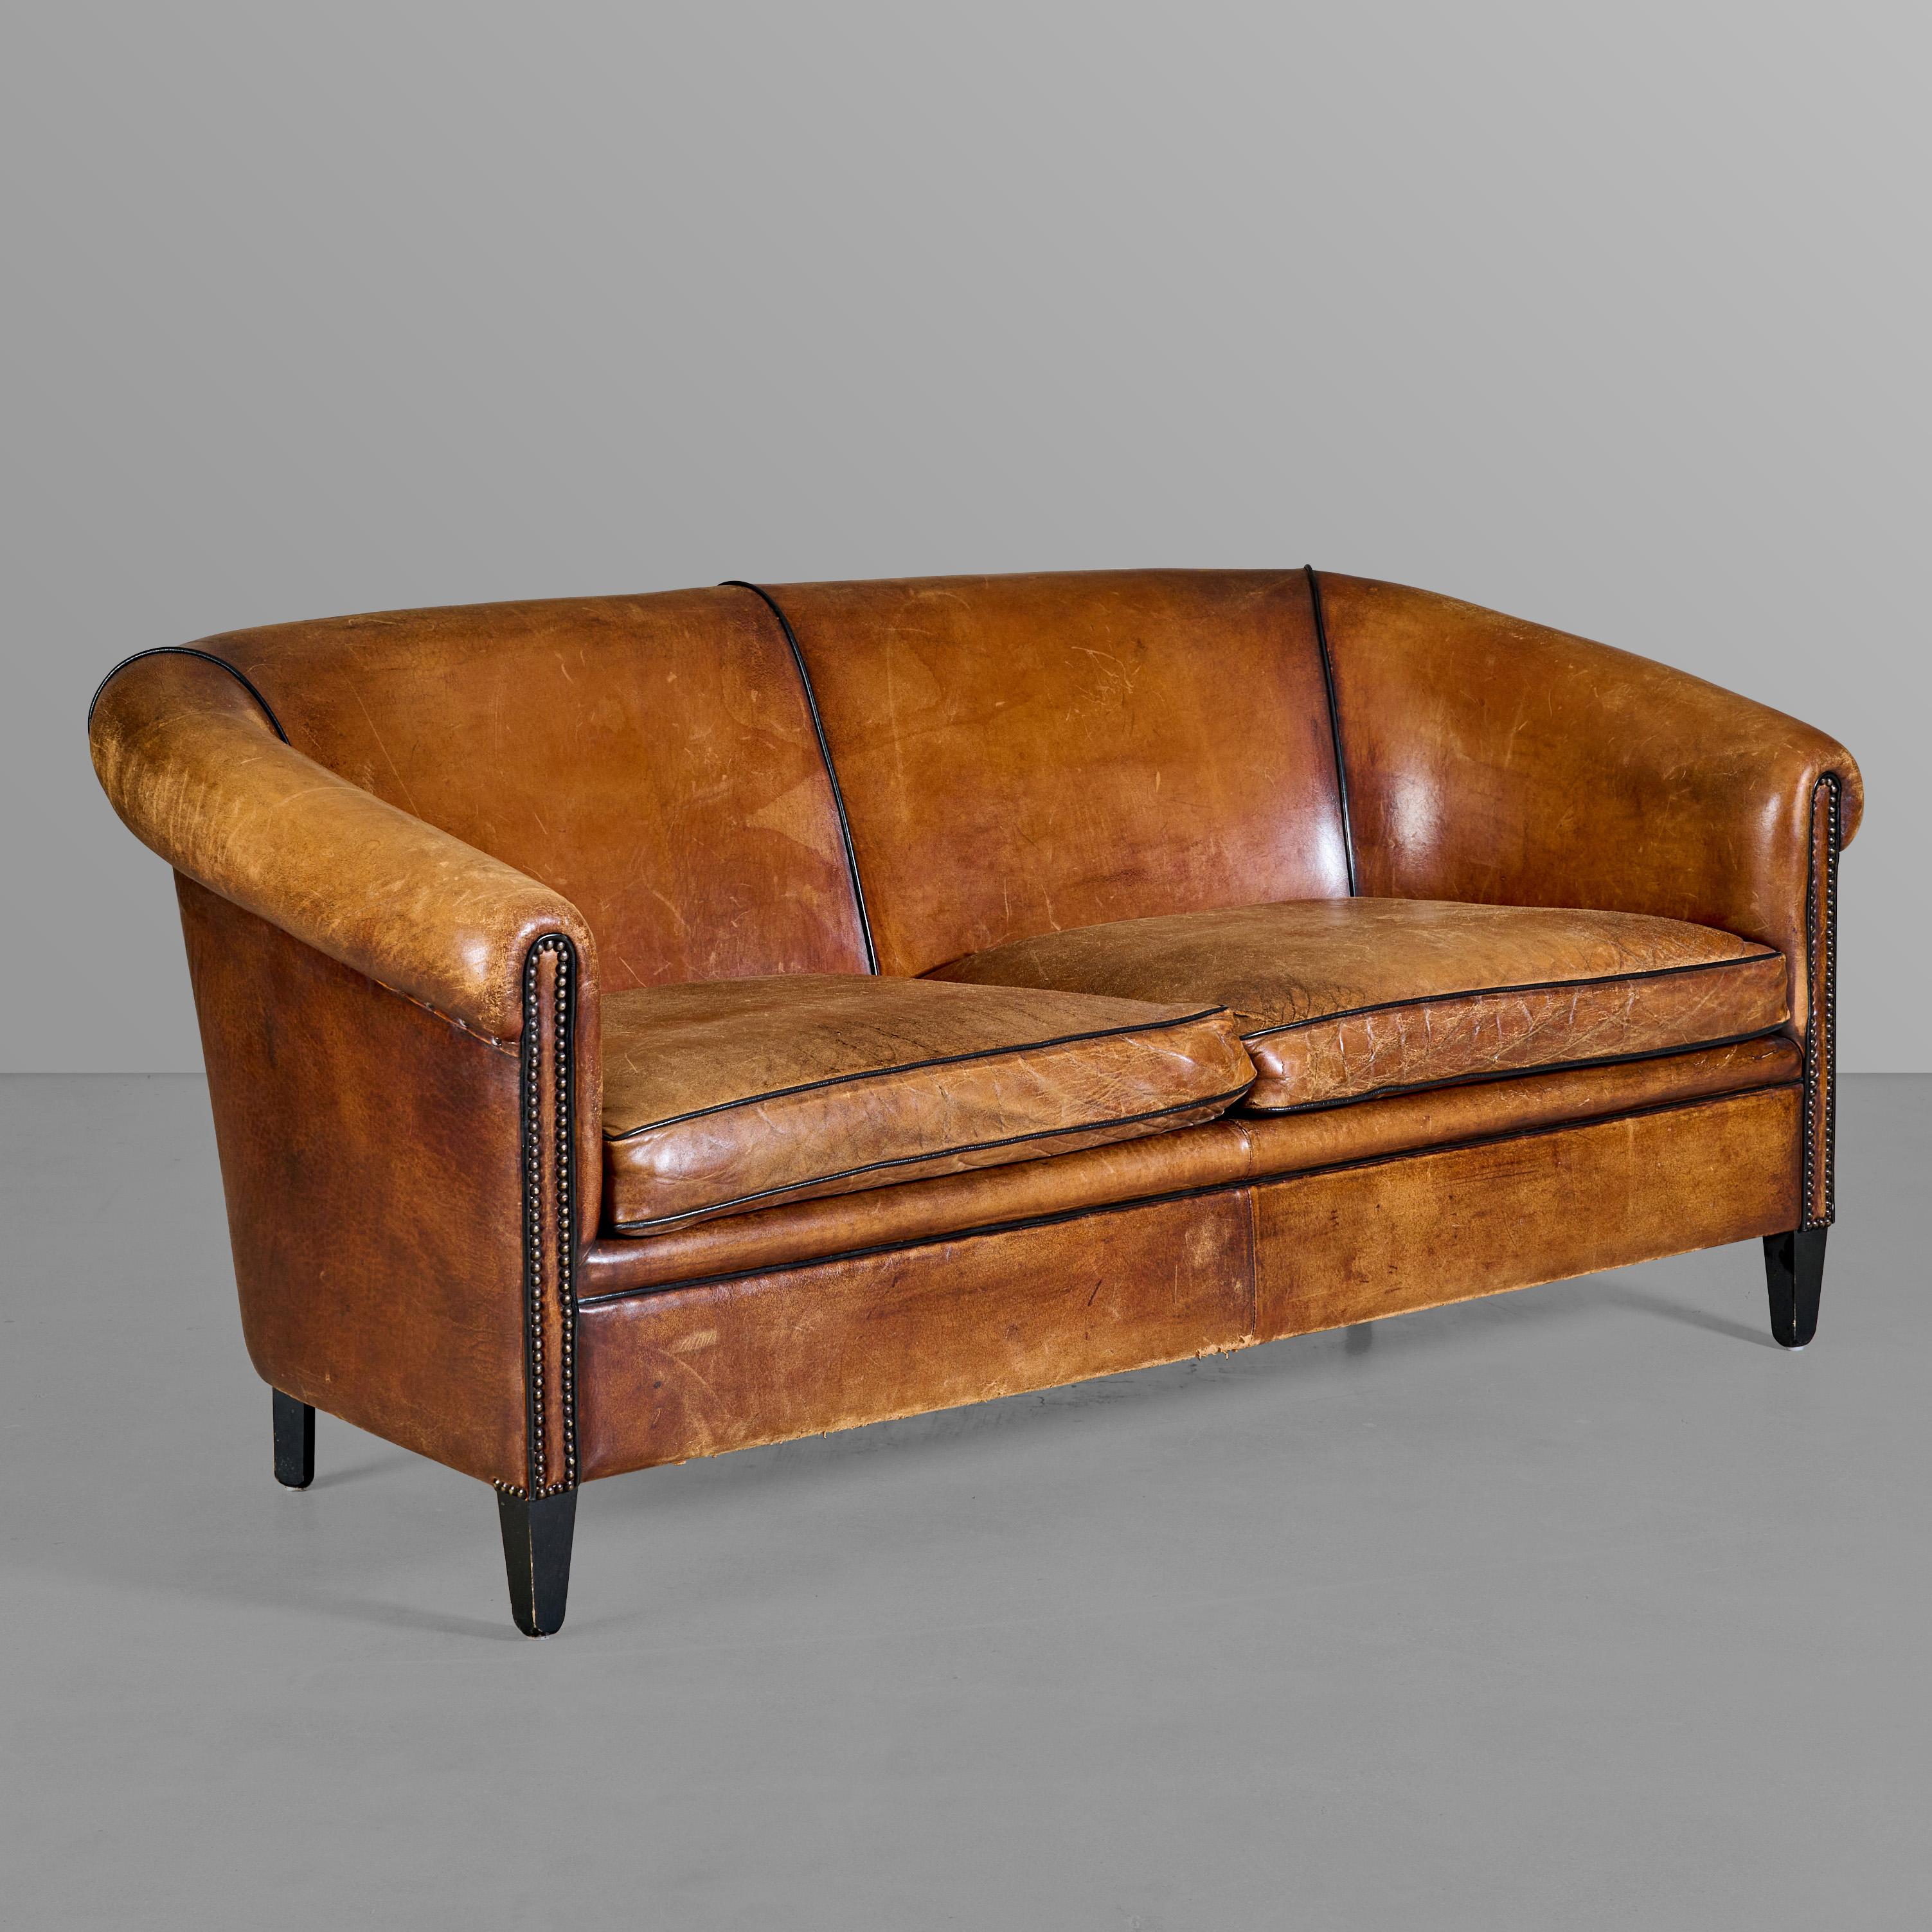 Leather club style sofa with nice trim and tack work.

